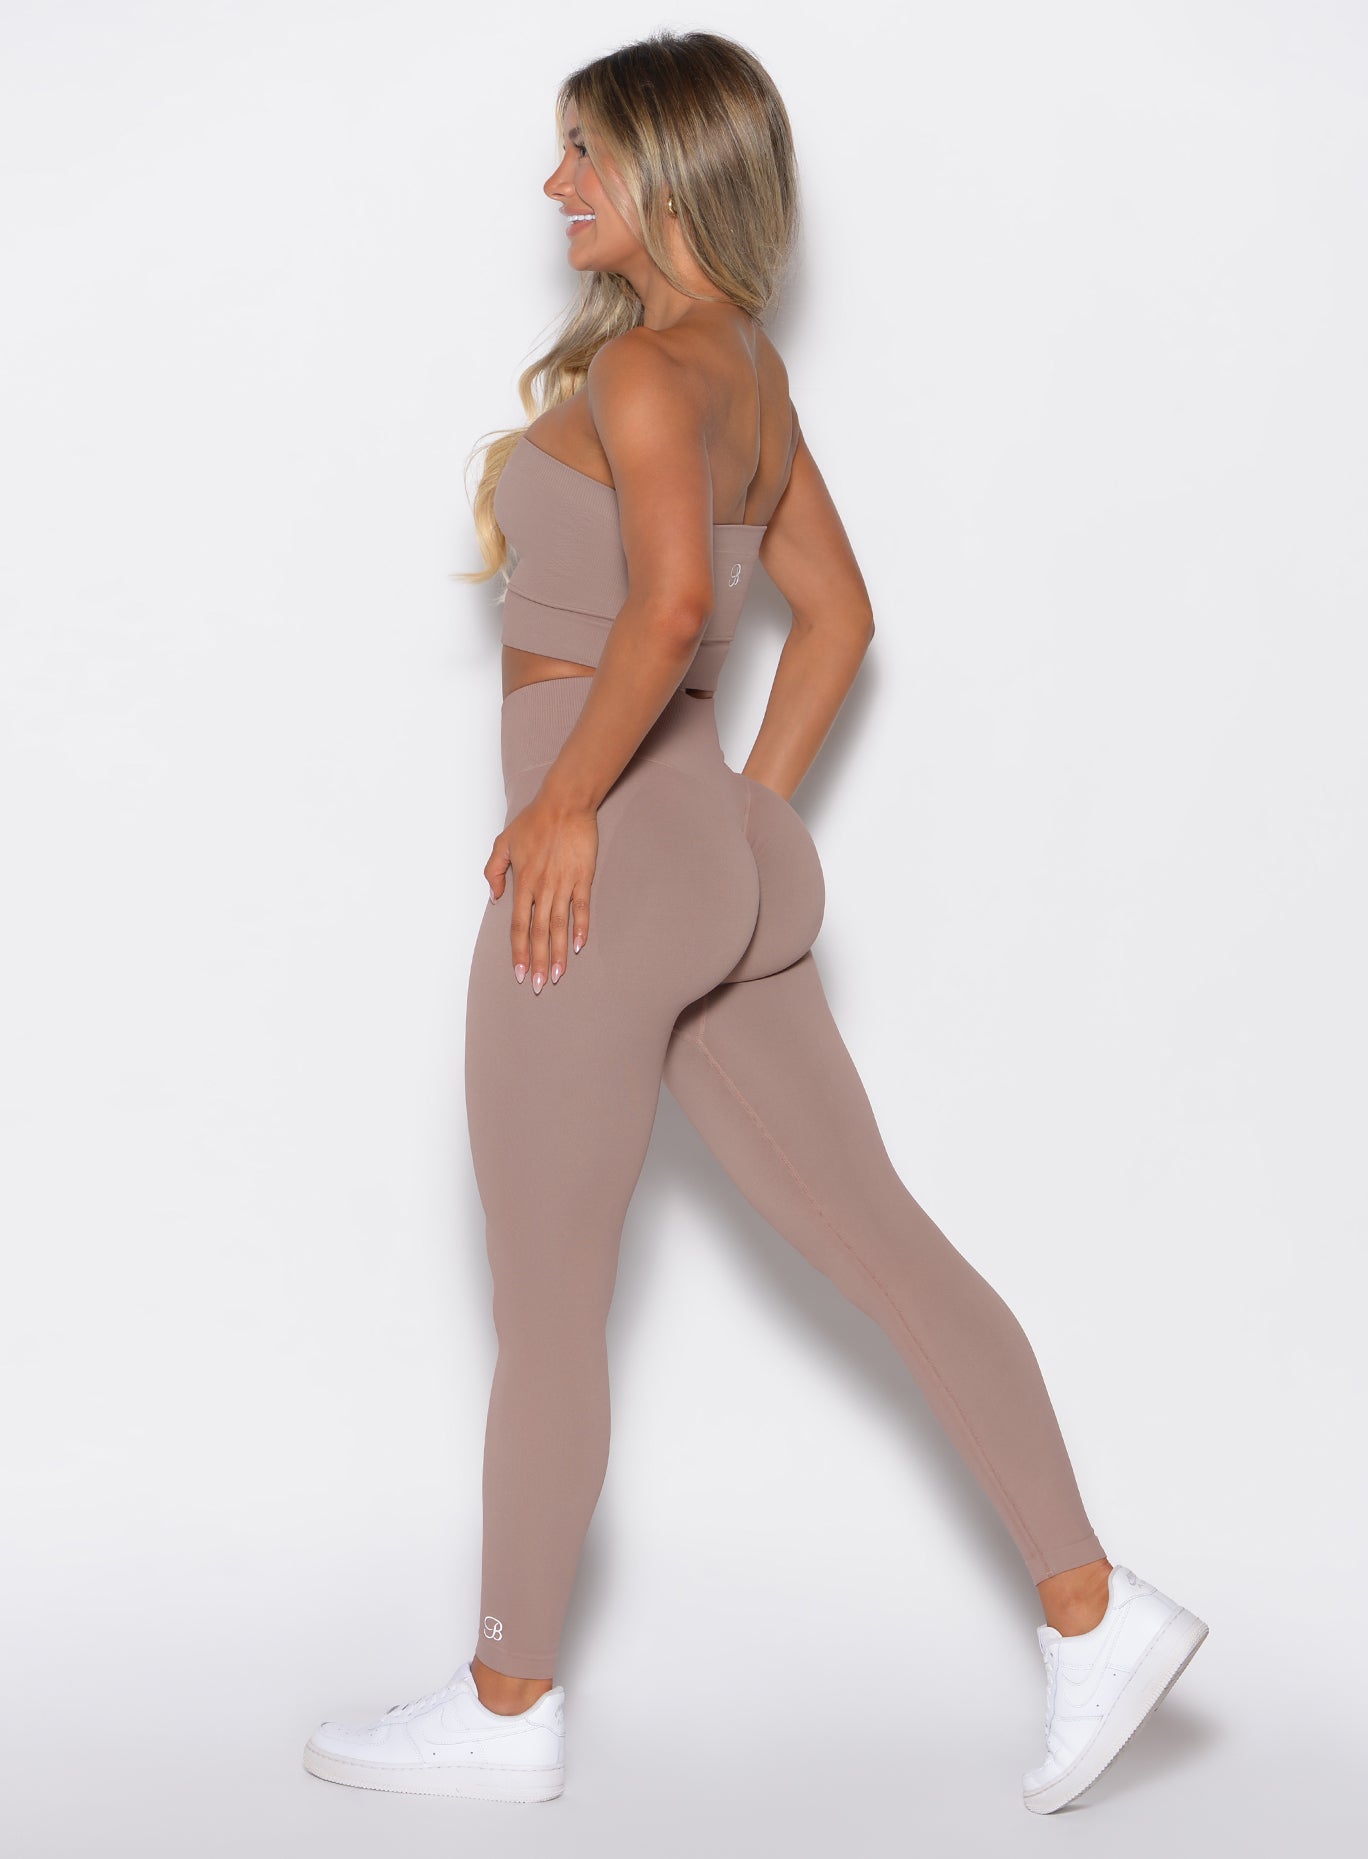 Left side profile view of a model facing forward wearing our cheeky seamless leggings in Soft Mocha color along with the matching bandeau